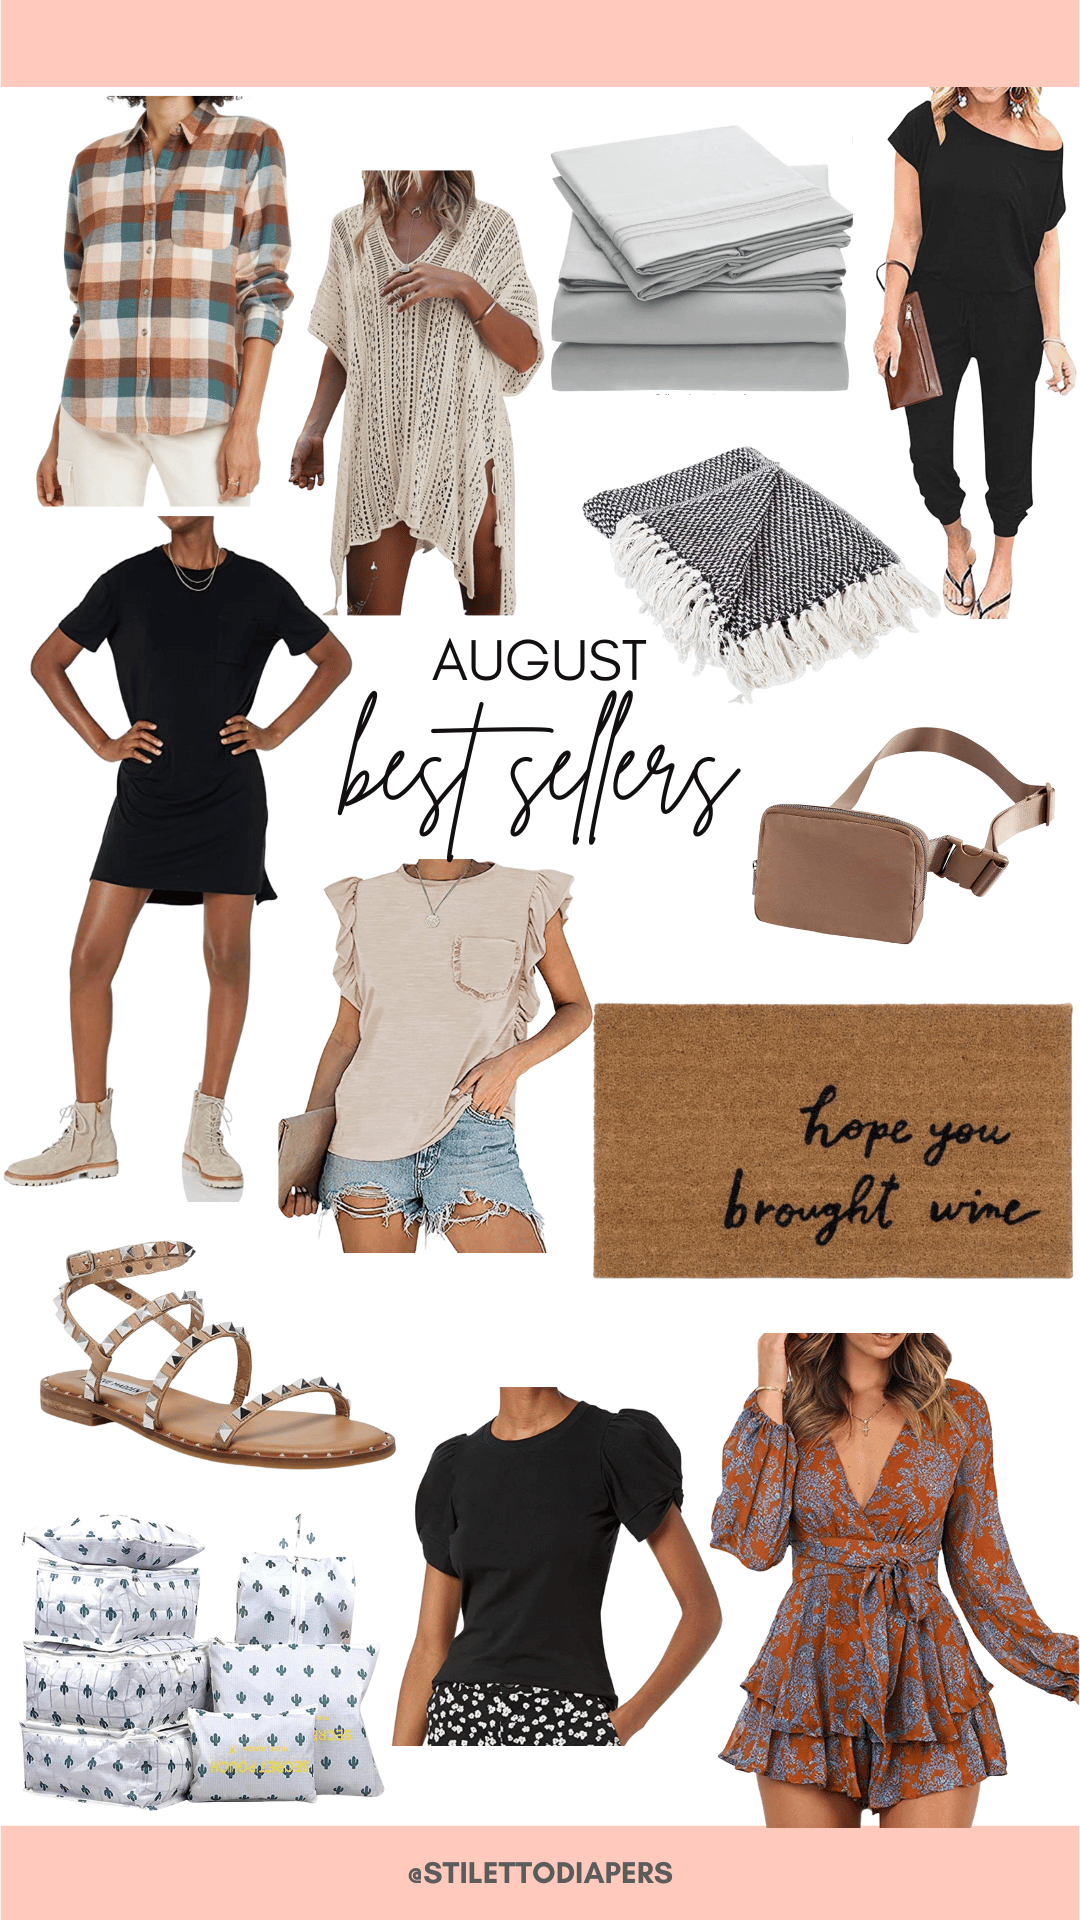 August Best Sellers, Stilettos and Diapers